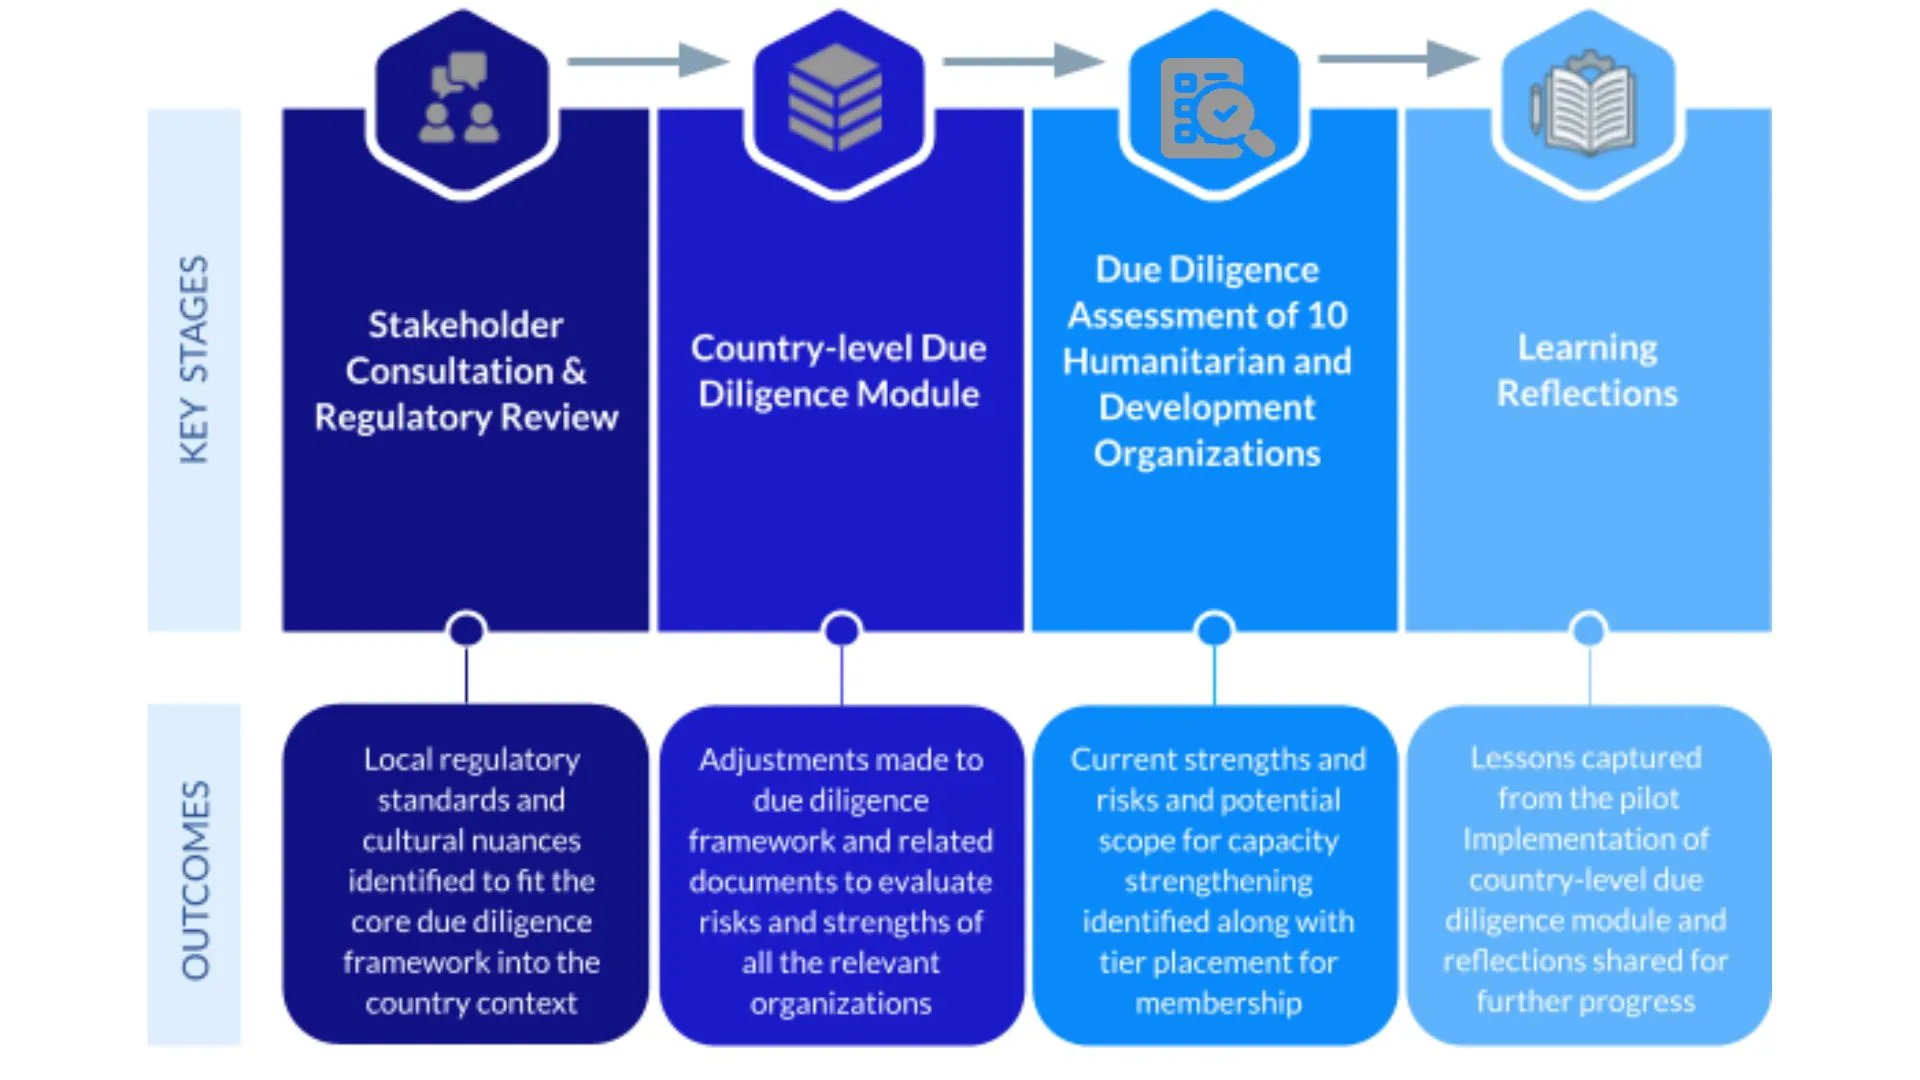 Overview of the Due Diligence Assessment Approach for Humanitarian Organizations in Bangladesh
